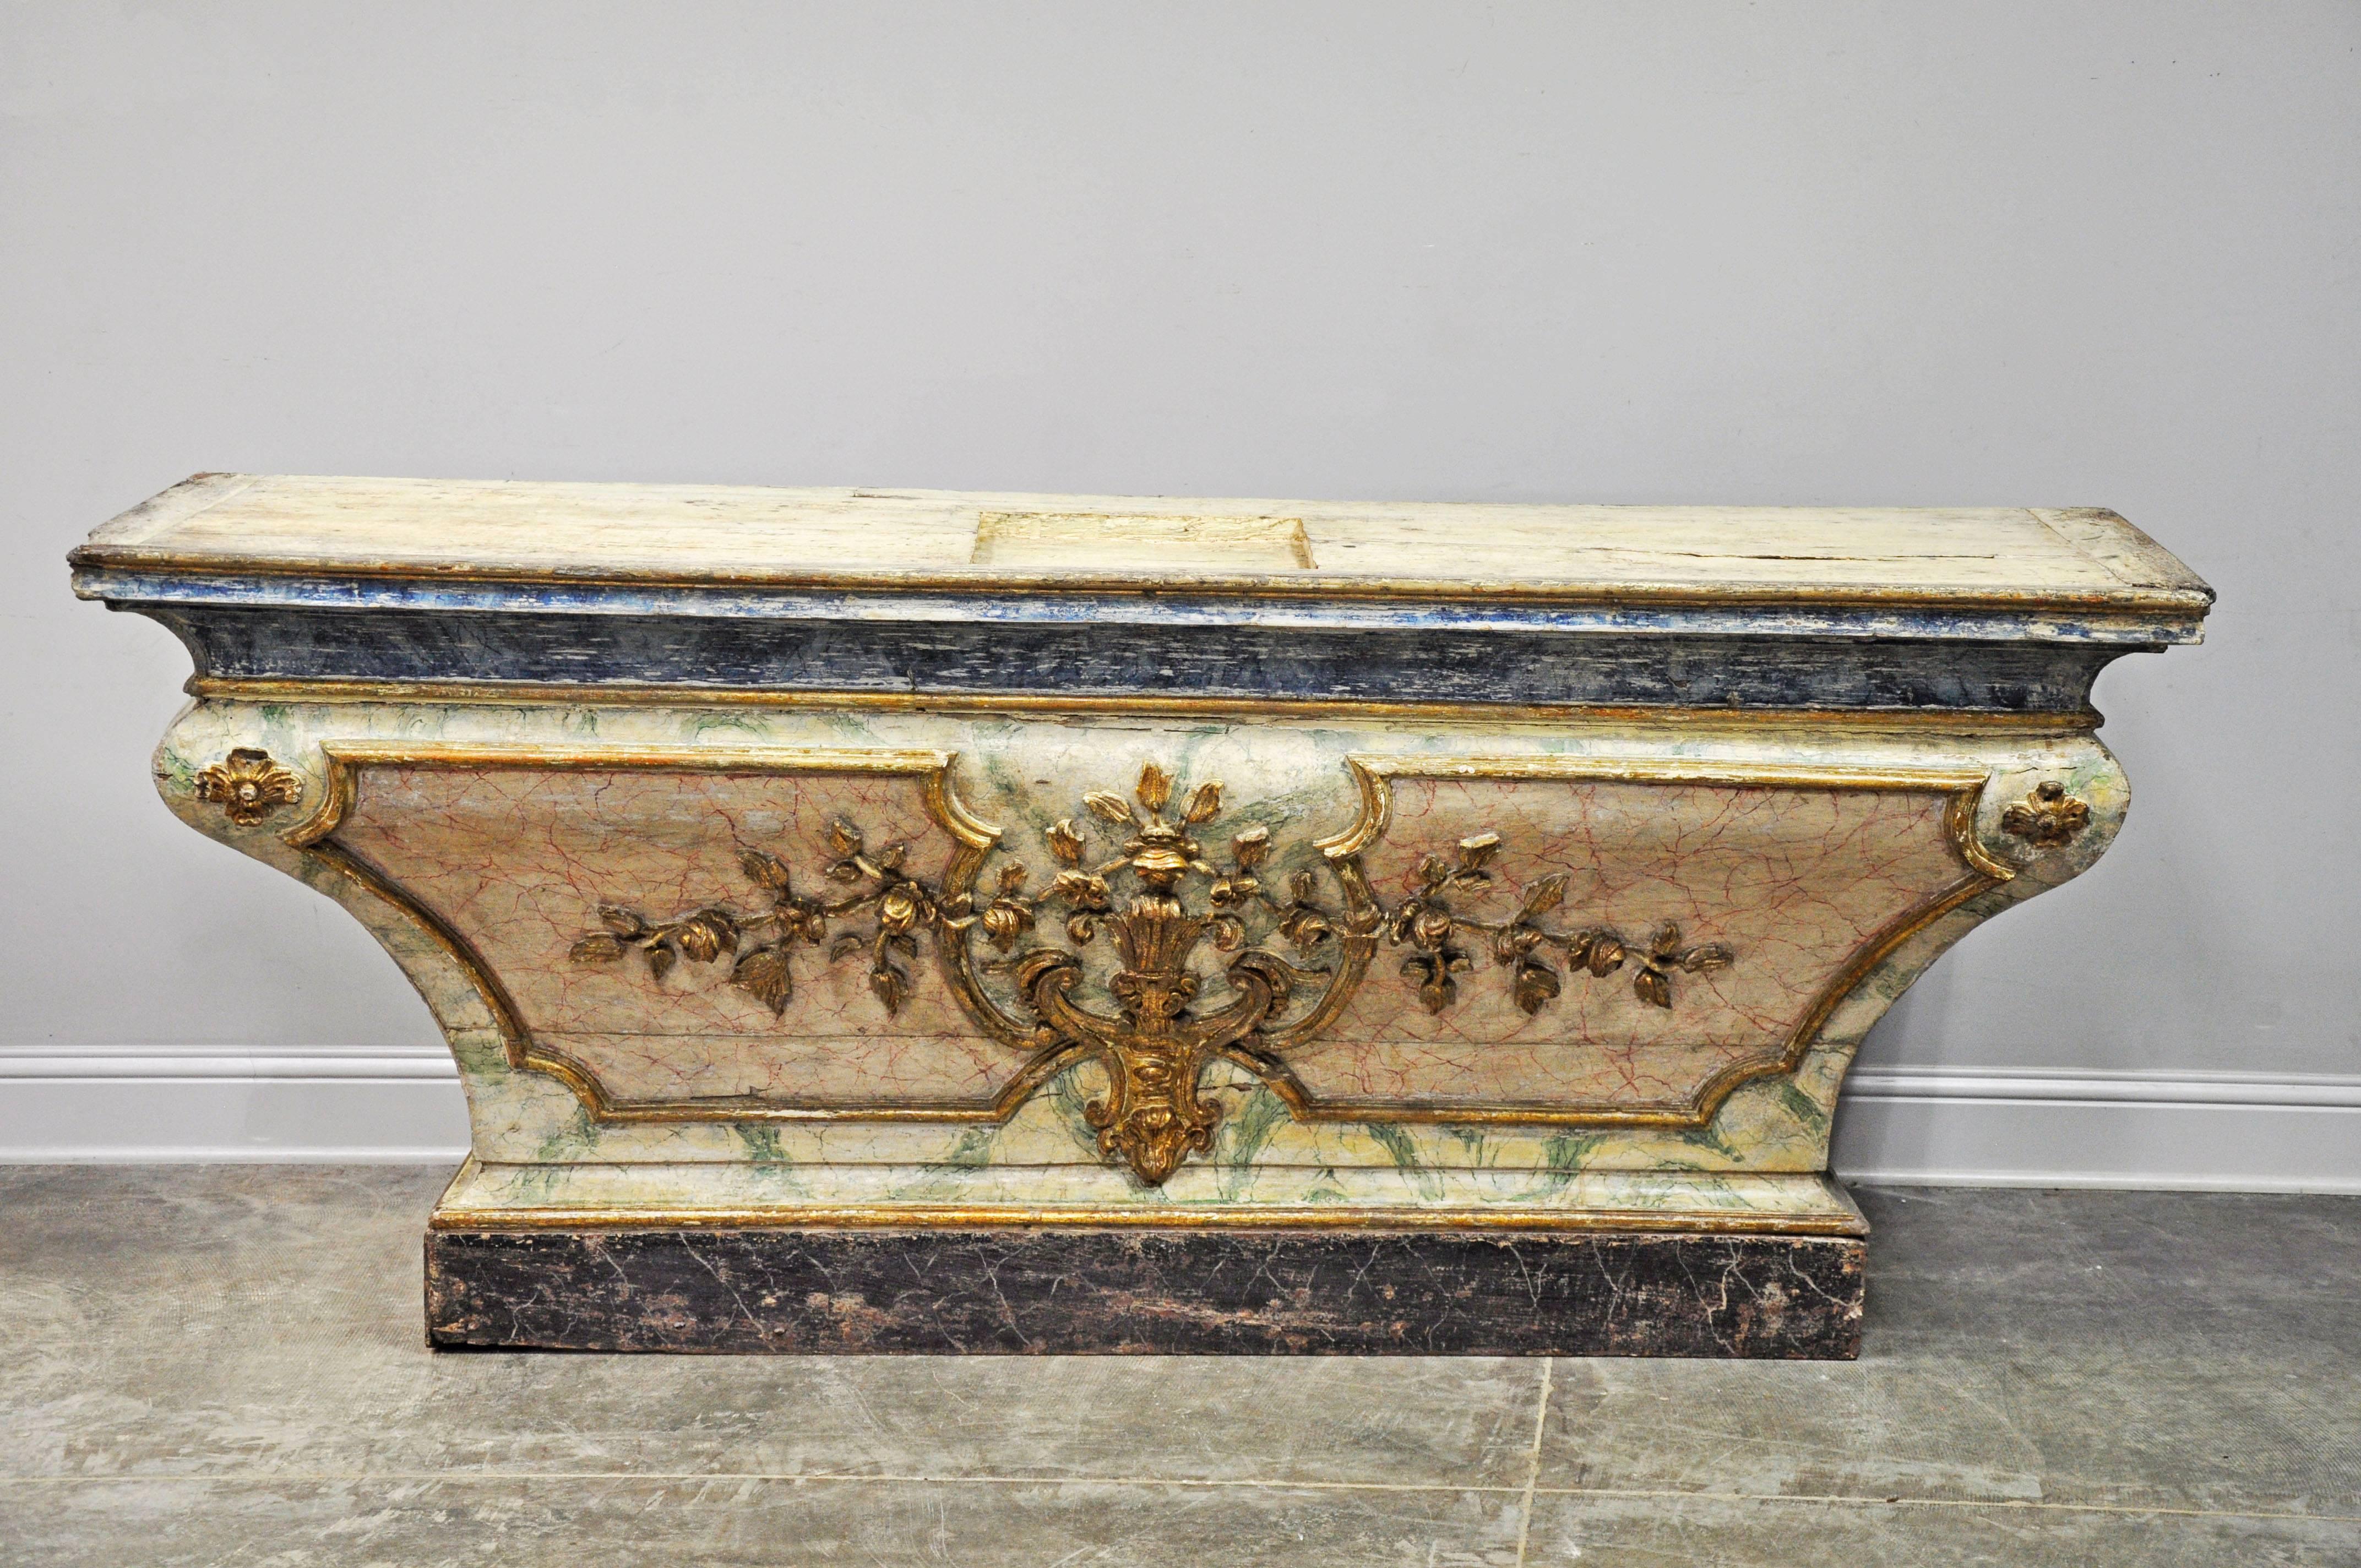 Carved wood with original gilt and polychrome. 

Established in 1979, Joyce Horn Antiques, Ltd. continues its 36 year tradition of being a family owned and operated business specializing in hand procured, fine European antique and reproduction